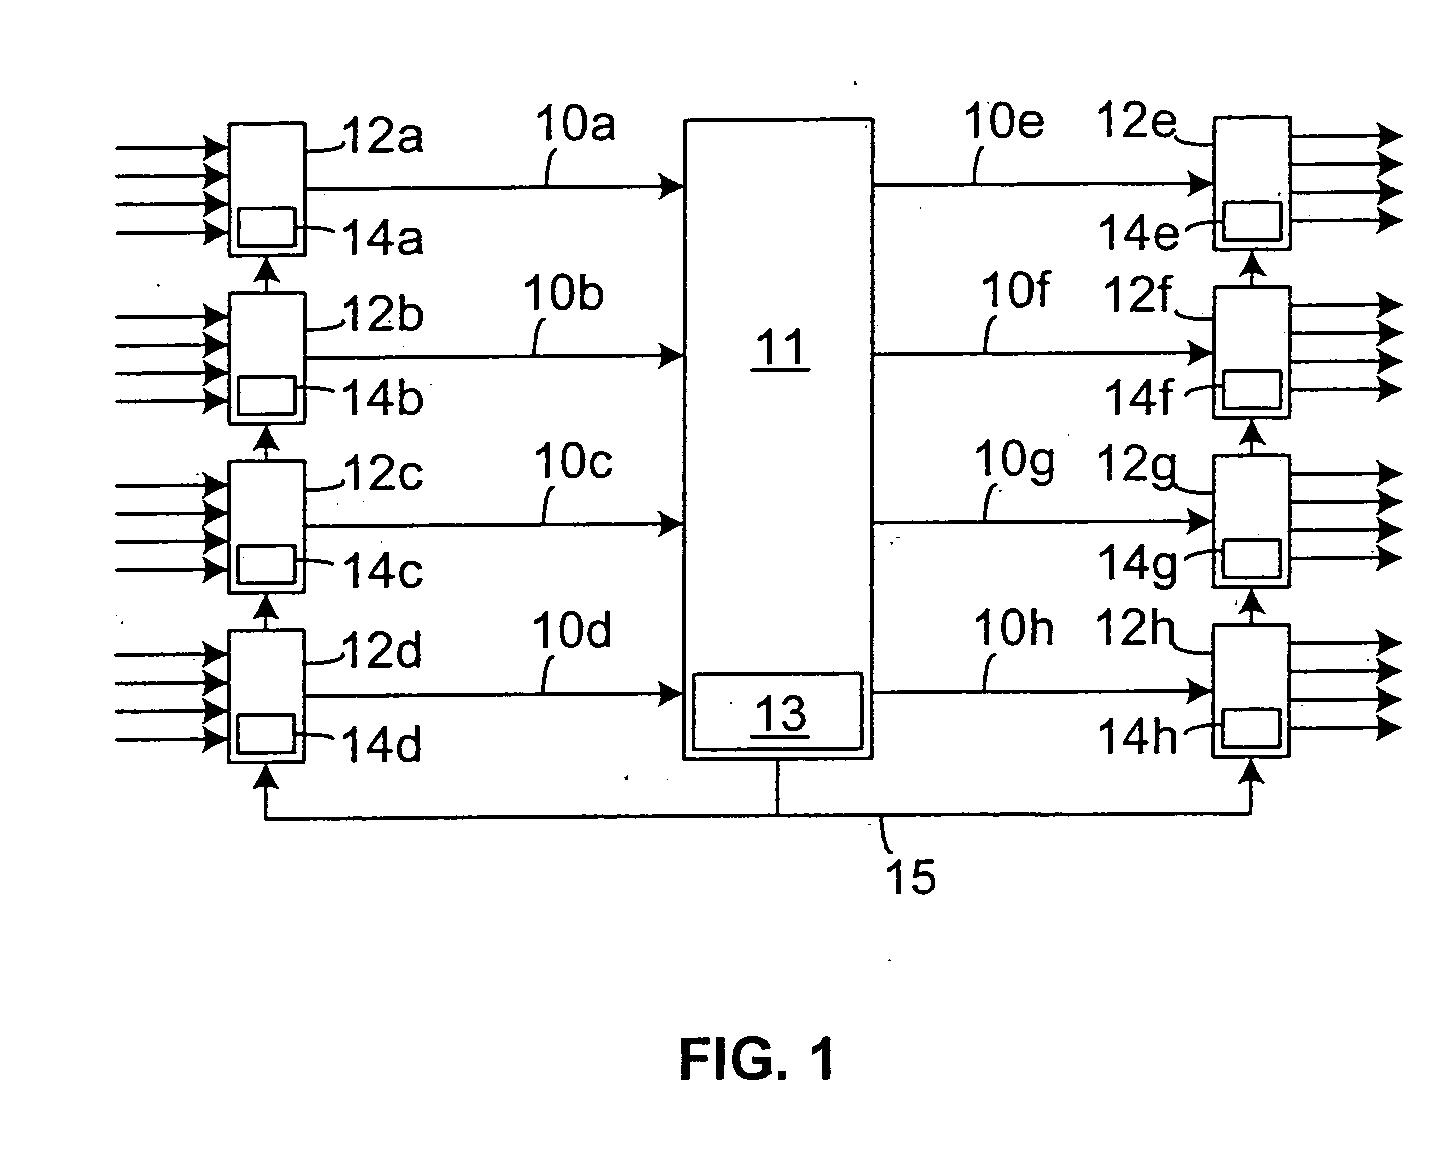 Method for dynamically computing a switching schedule